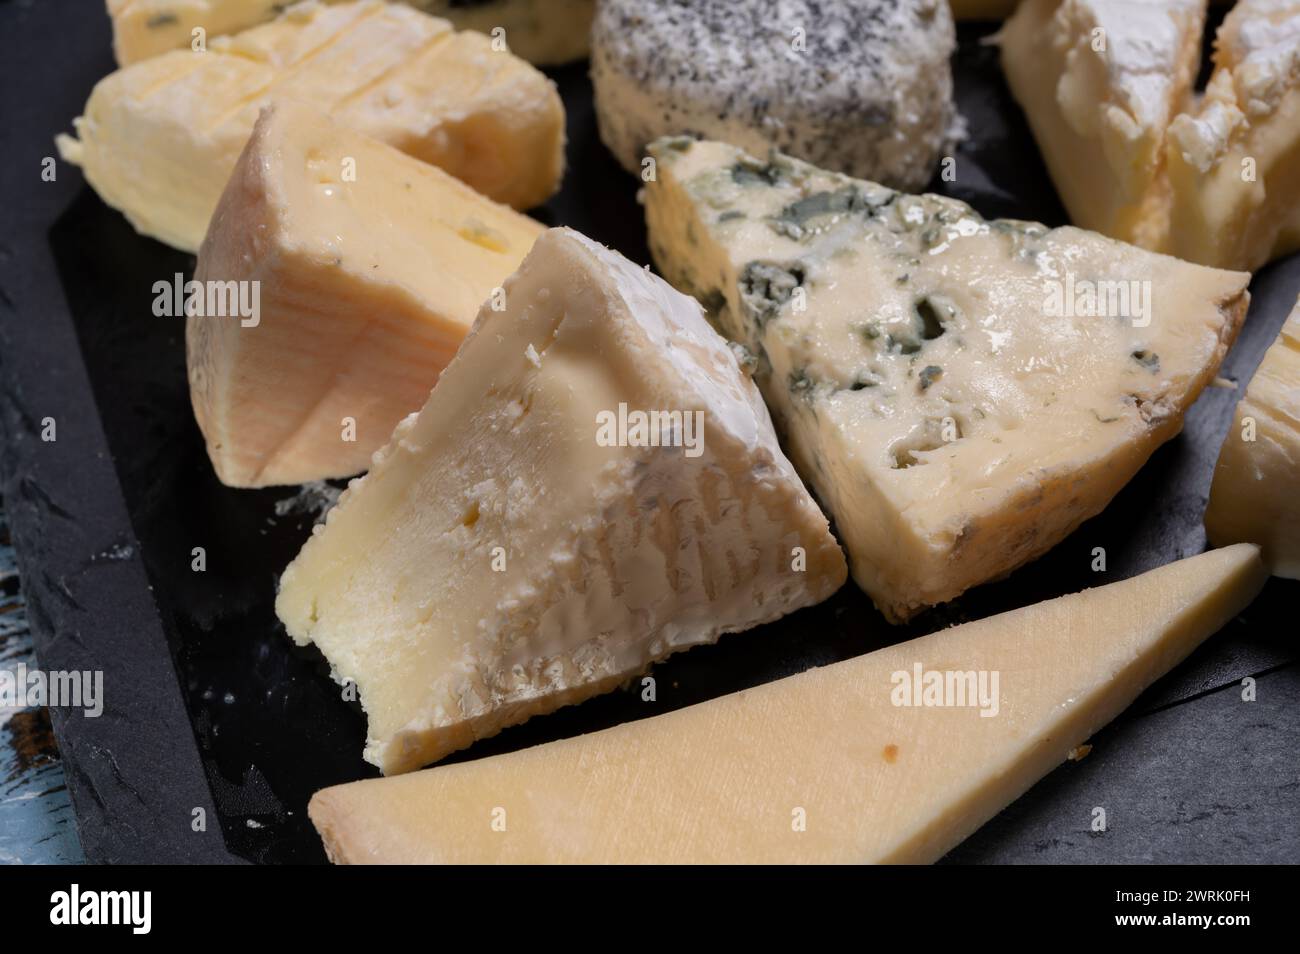 Tasting plate with many small pieces of different French cheeses, variety of cheeses Stock Photo